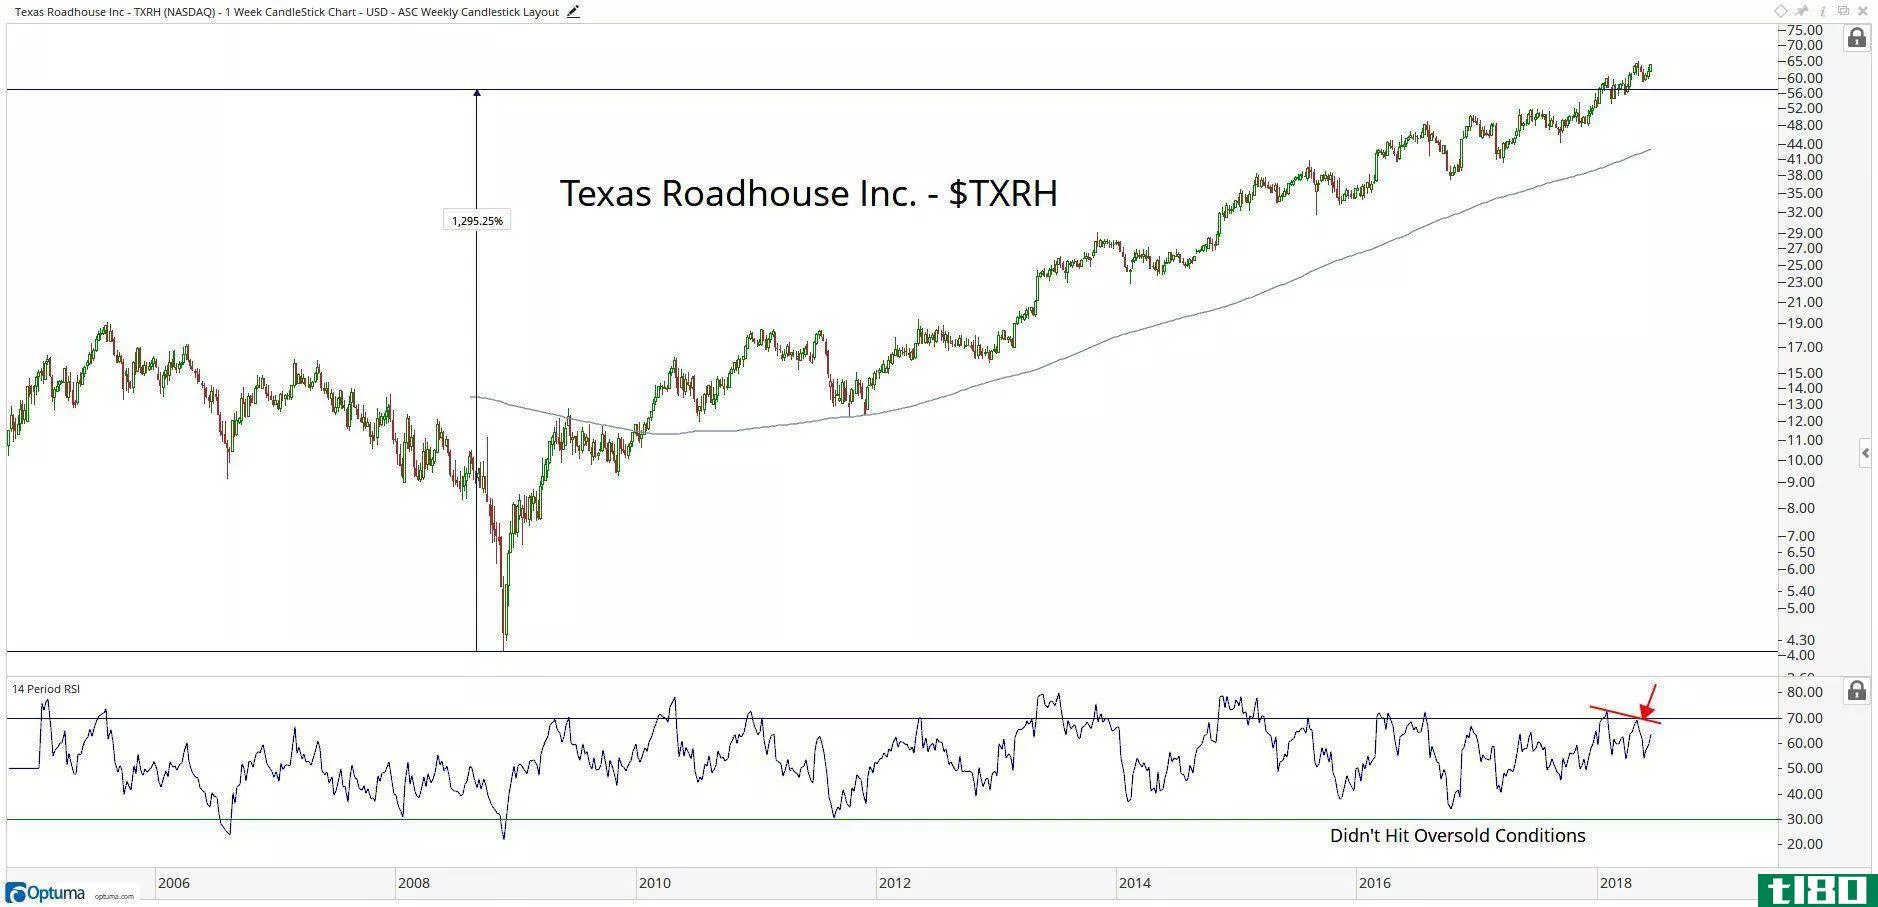 Technical chart showing the performance of Texas Roadhouse, Inc. (TXRH) stock